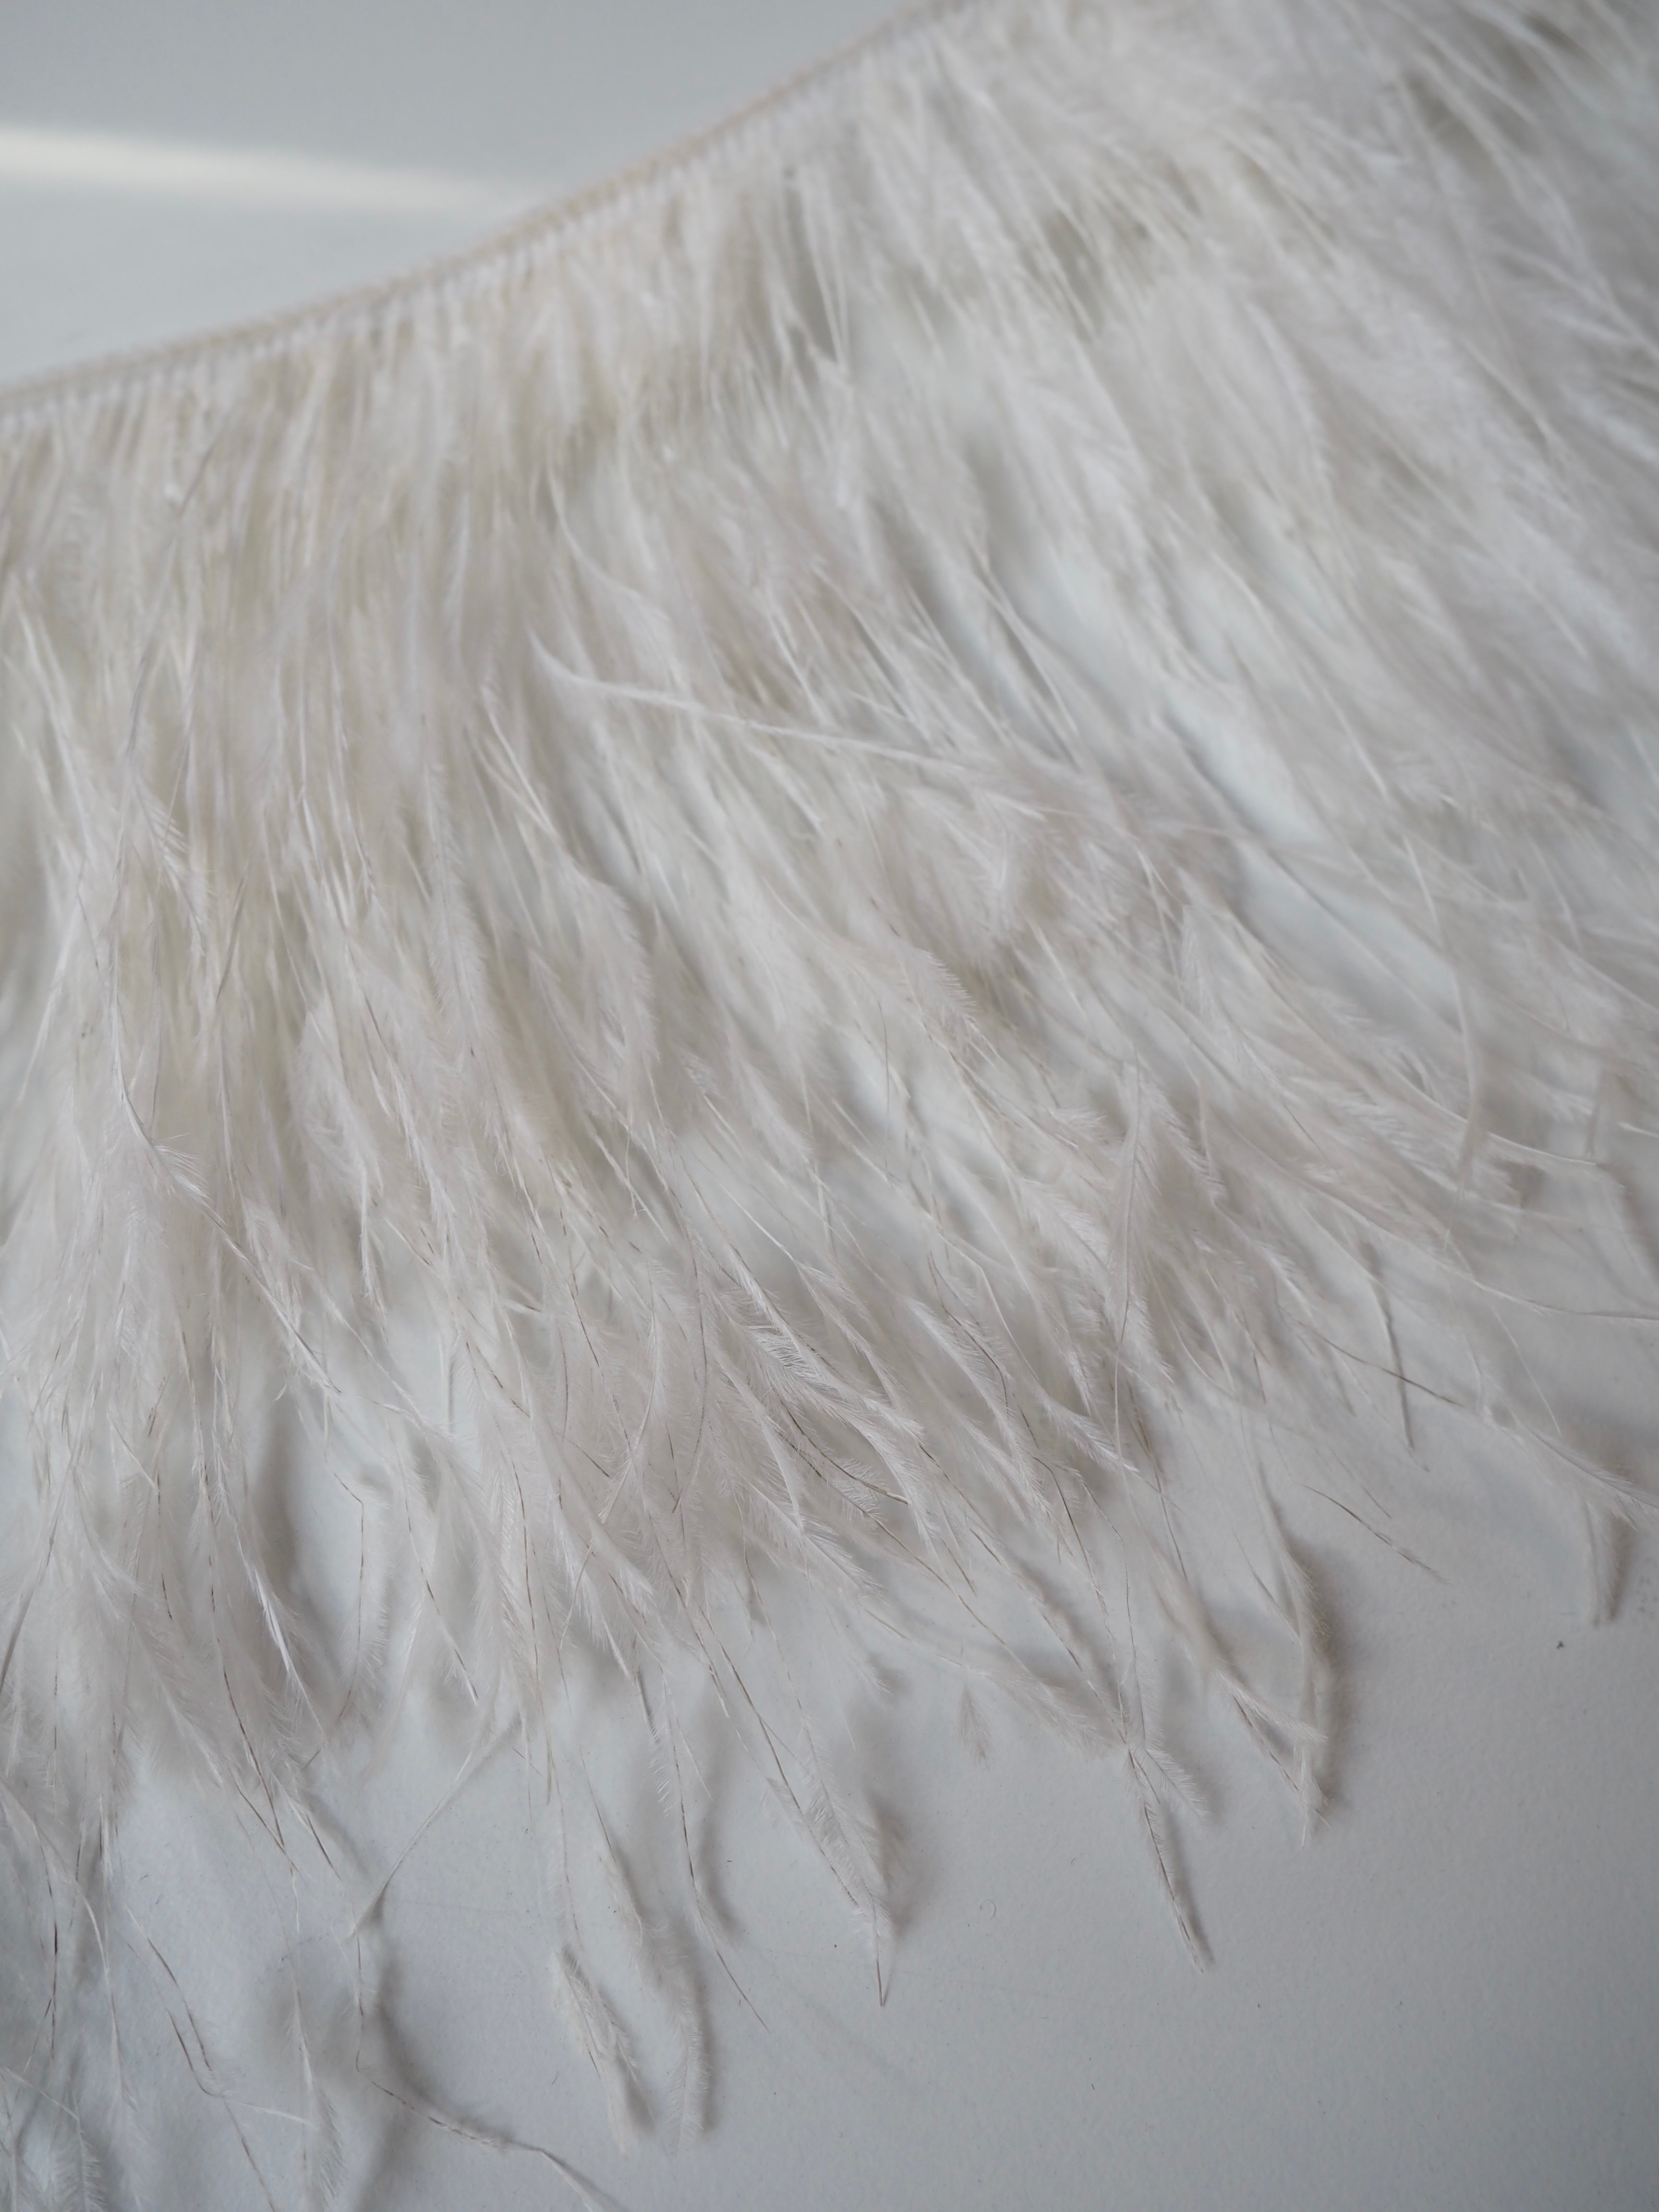 Ostrich Feather Trim 5 Long. Black or Light Brown Colors Available